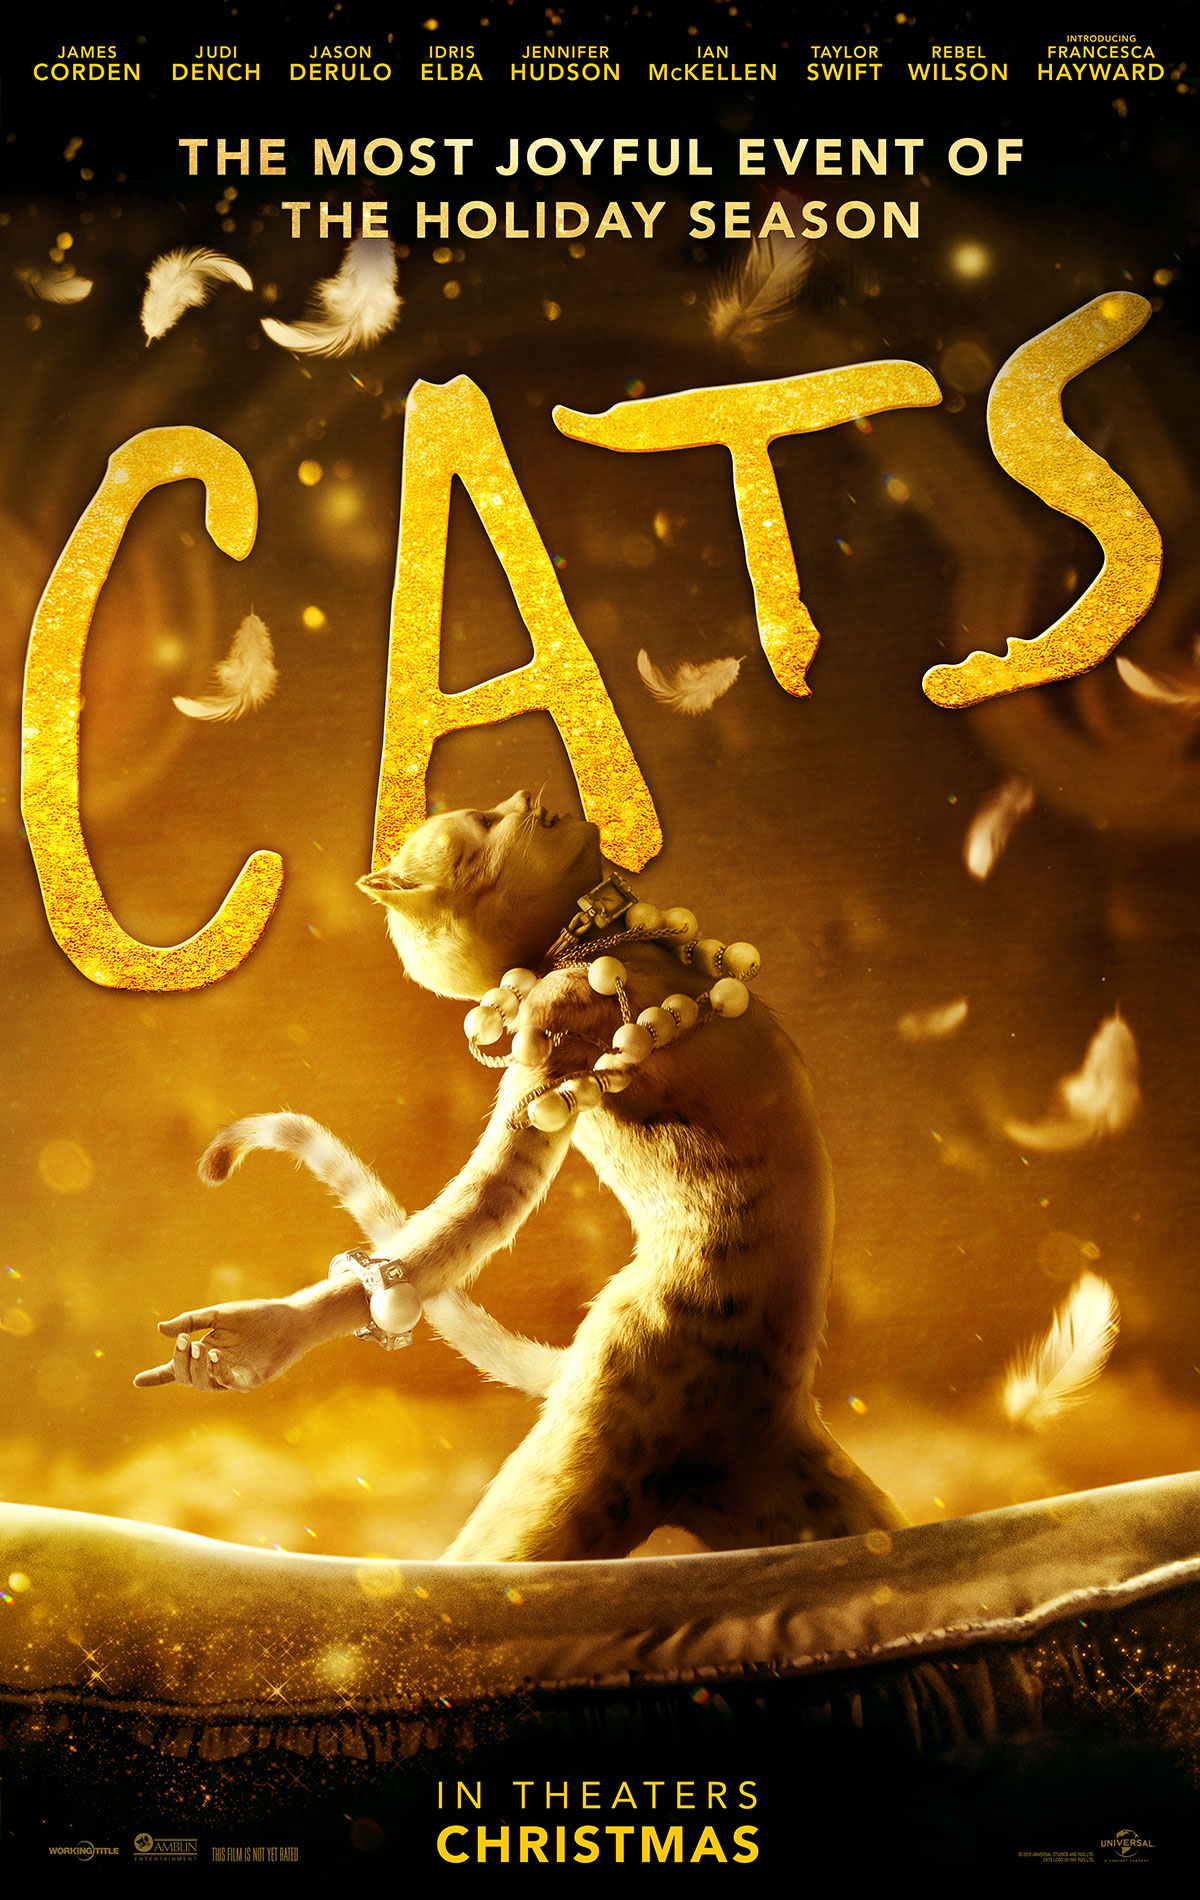 Taylor Swift Grabs Eyeballs With Her Performance In The New Cats Trailer